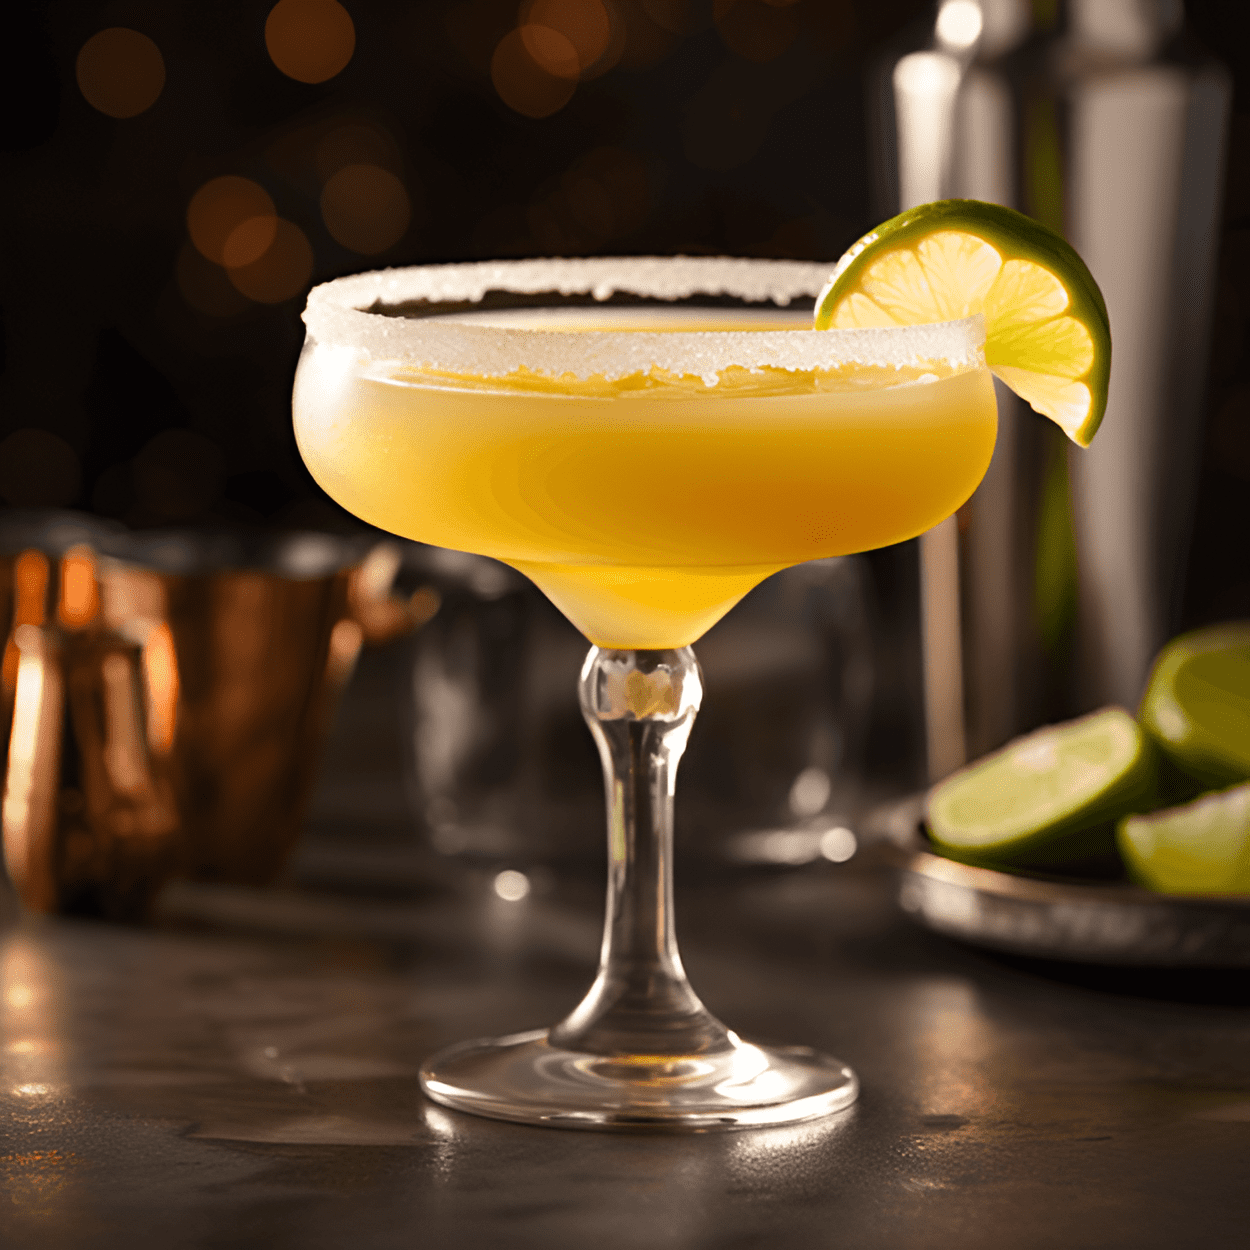 Matador Cocktail Recipe - The Matador is a well-balanced cocktail with a strong tequila base. It has a sweet and sour taste, thanks to the pineapple juice and lime juice. The Grand Marnier adds a hint of bitterness and complexity to the drink.